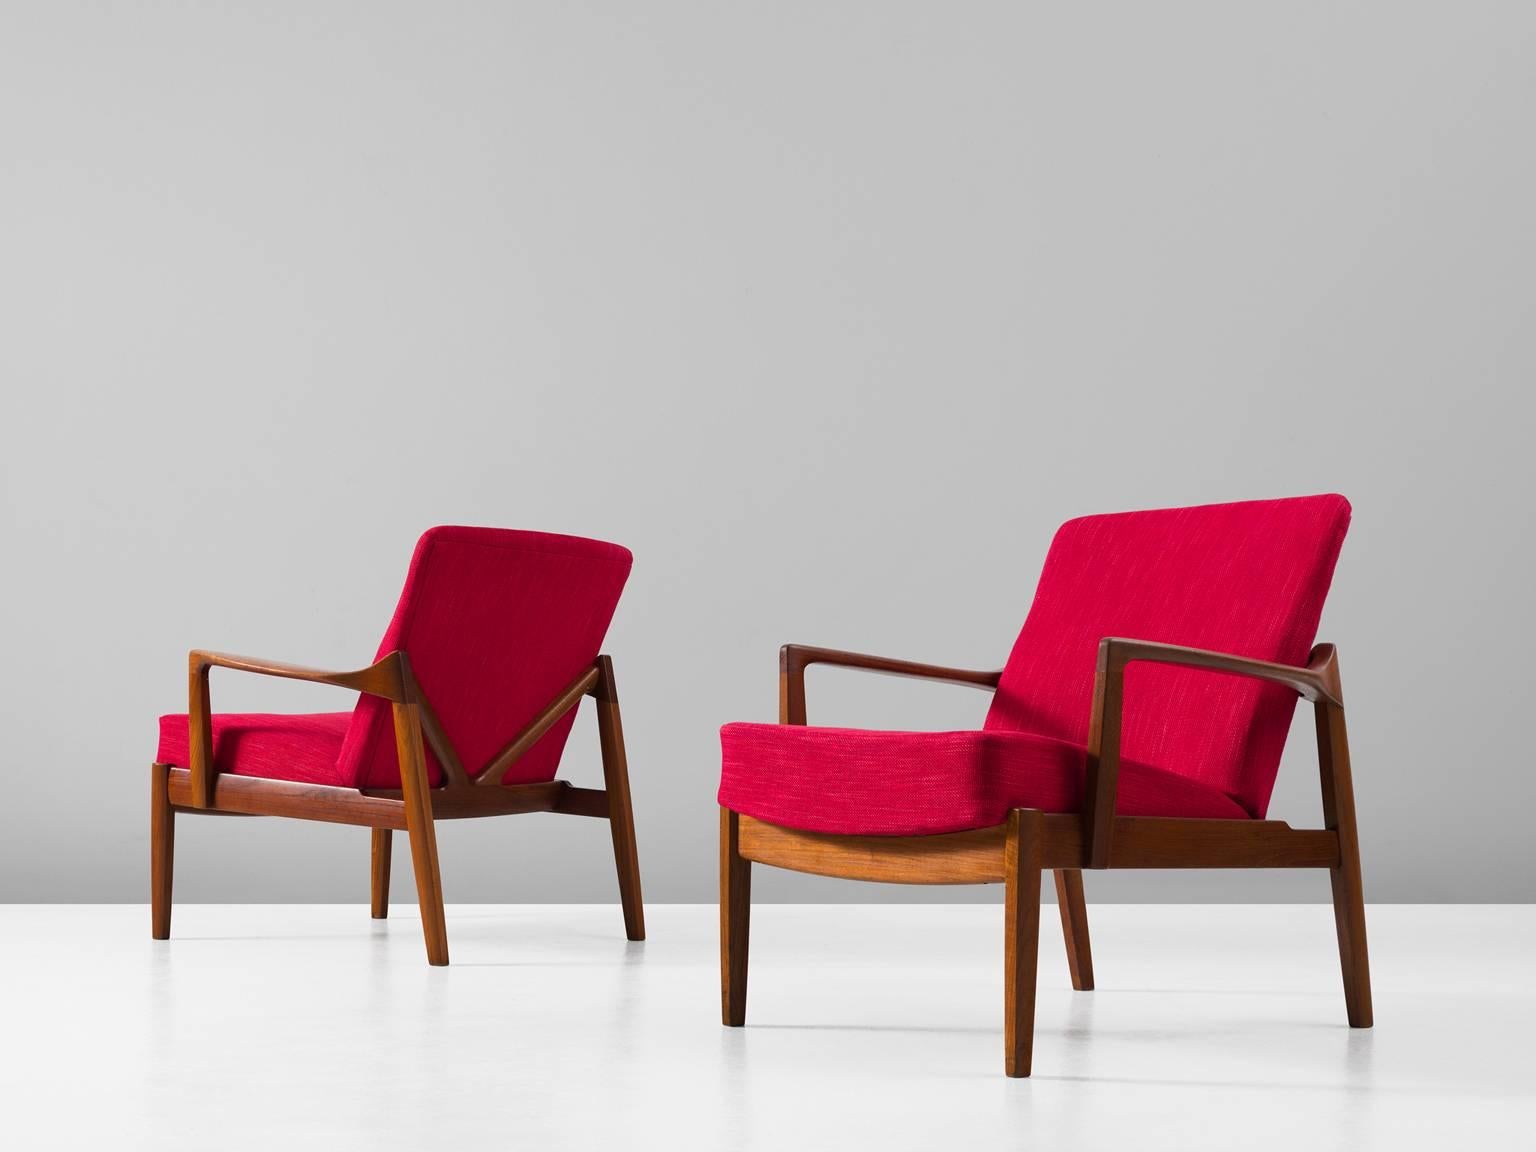 Set of two armchairs, in teak and fabric, by Tove & Evard Kindt-Larsen for France & Son, Denmark, 1950s.

Very refined set of easy chairs. A true Danish Design set, with beautiful lines. The chairs have a really open character, due the teak frame